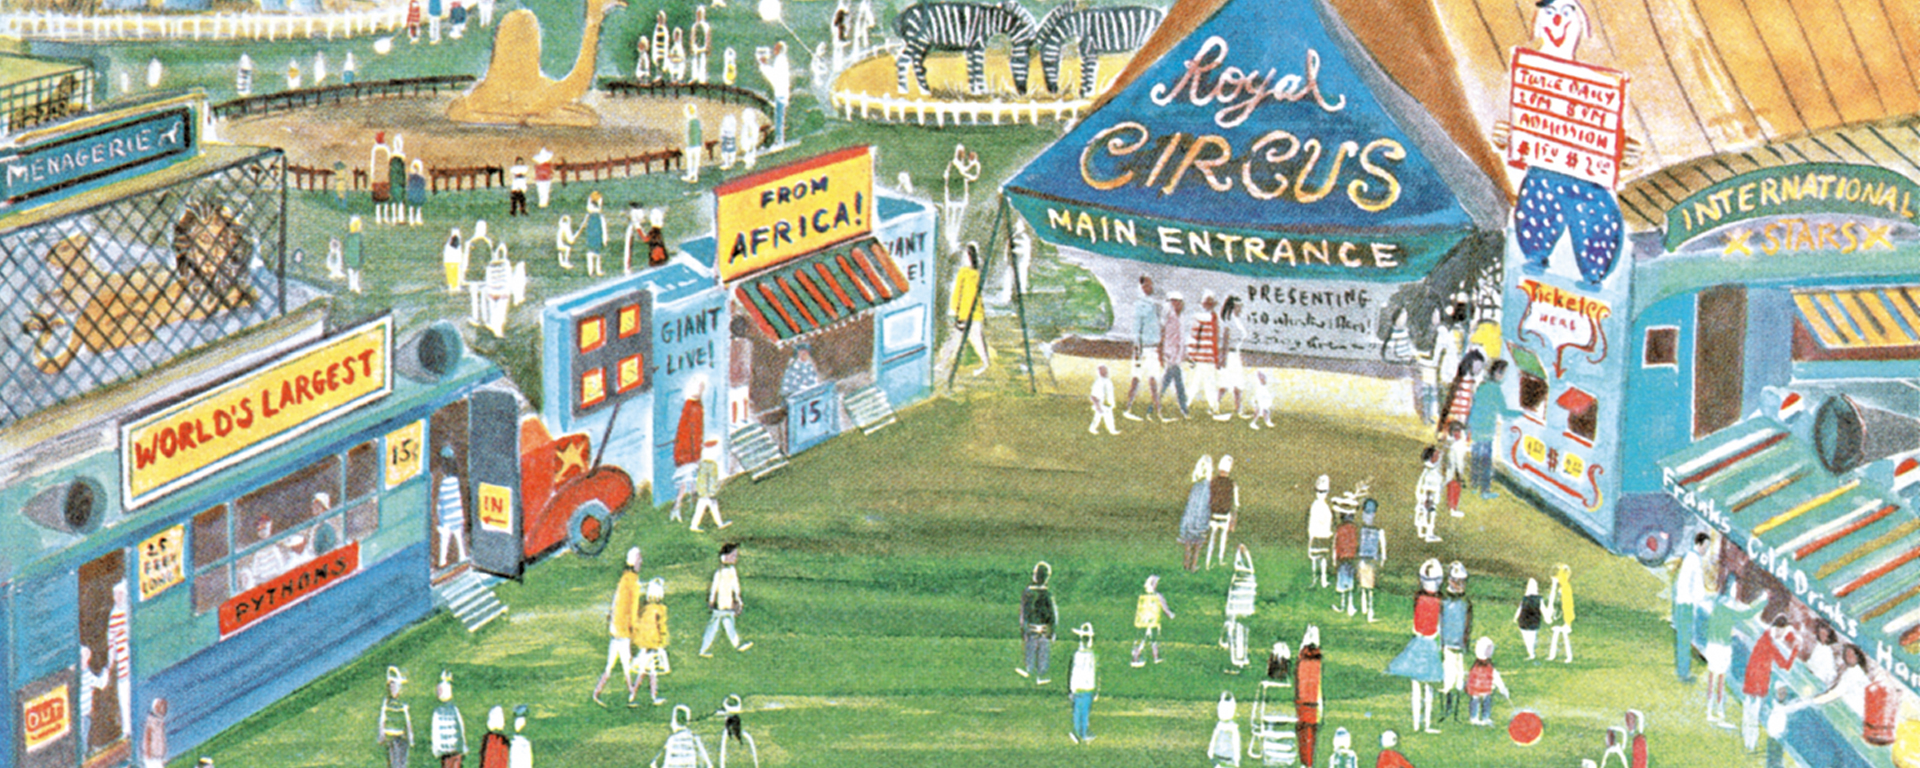 new yorker cover art of a circus tent surrounded by people exploring circus vendors and animal exhibits